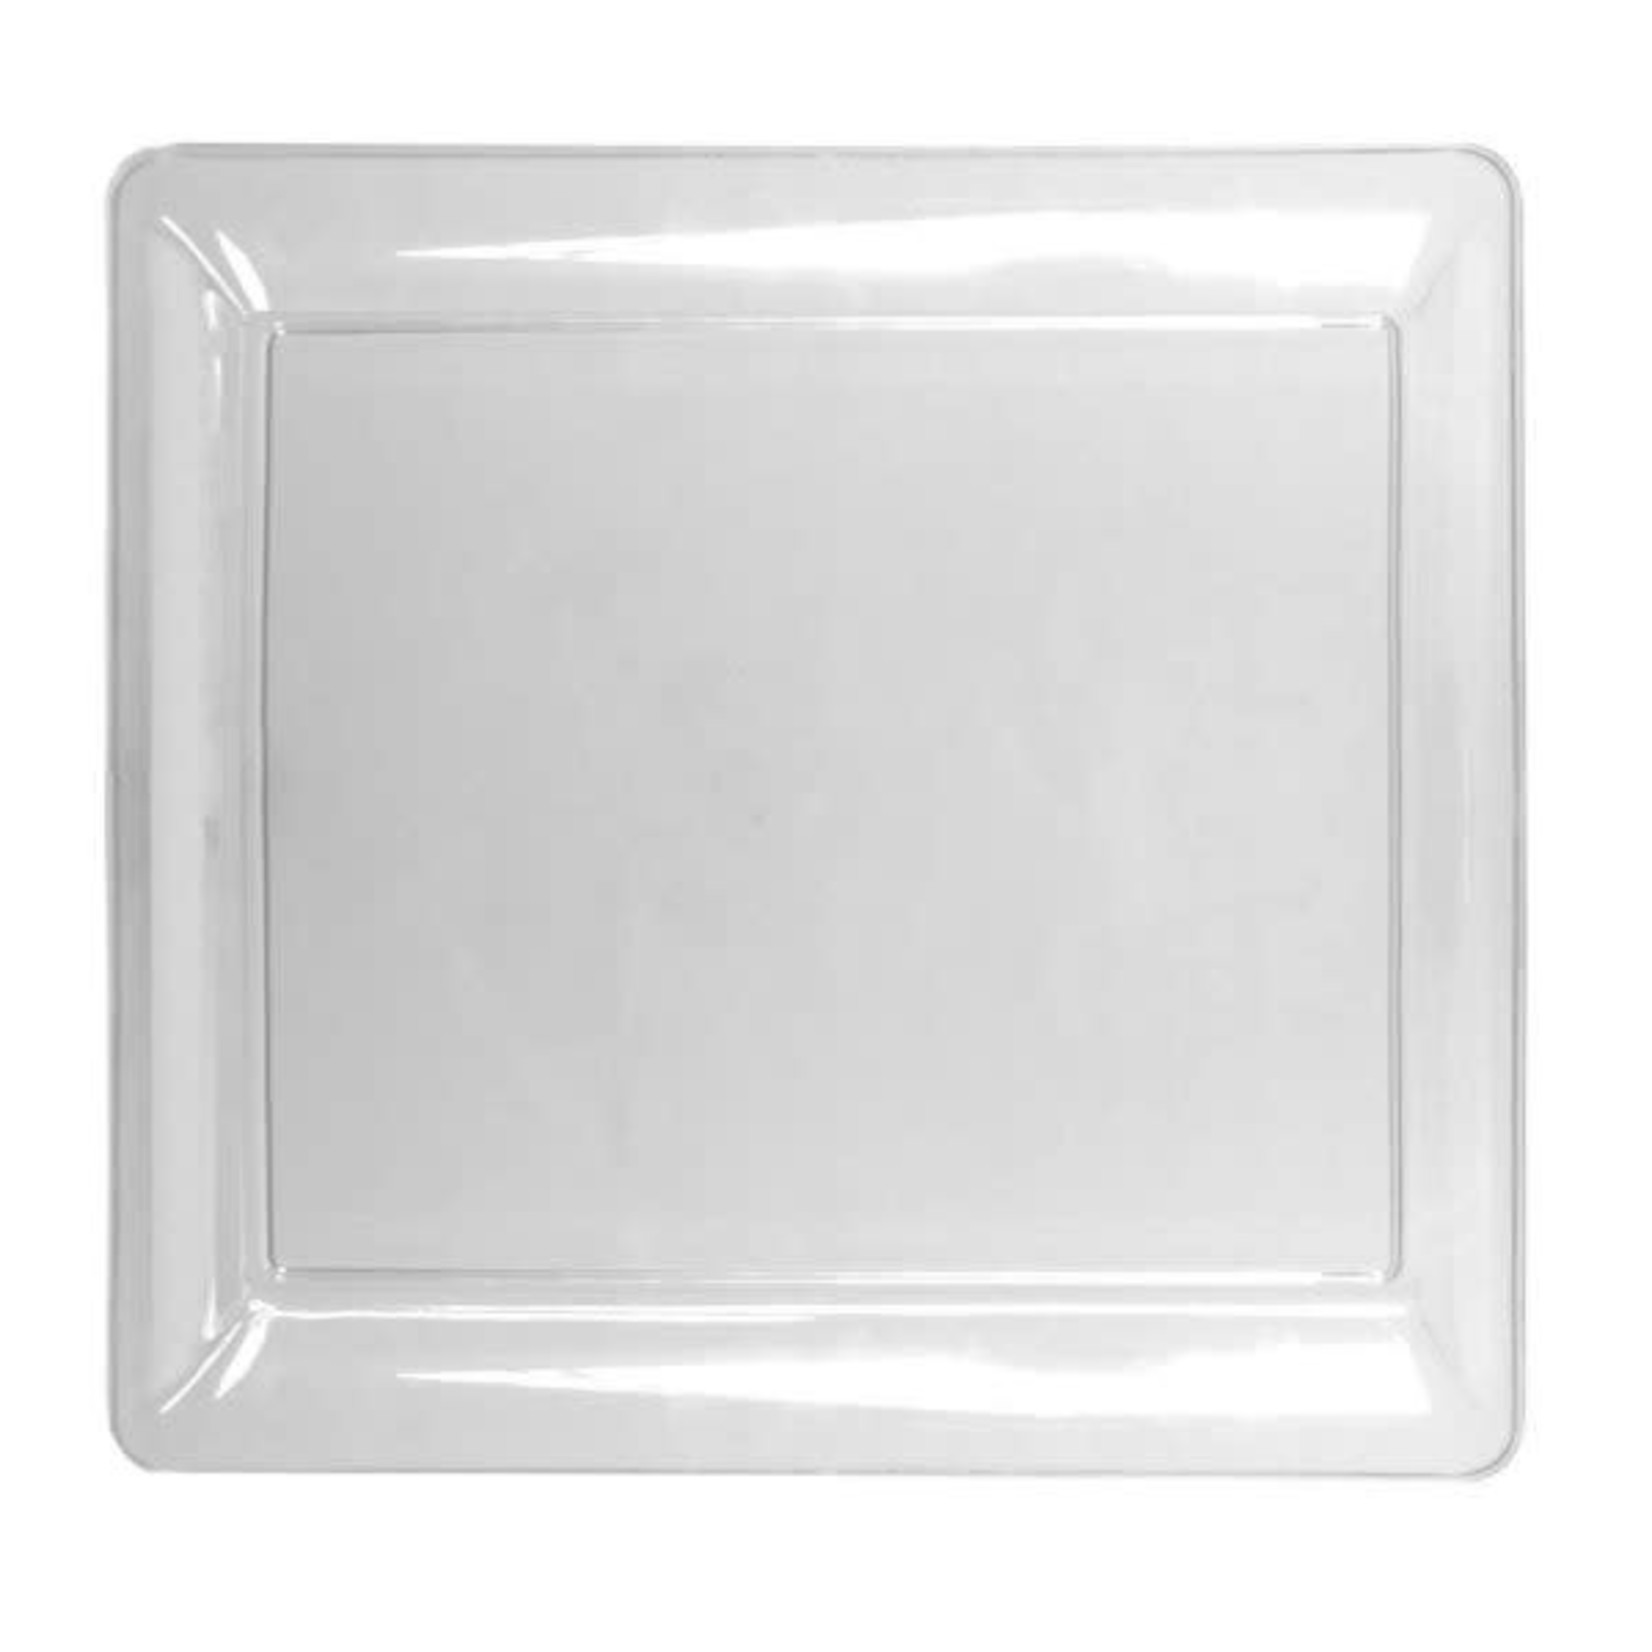 northwest Clear Square Tray - 16" x 16"